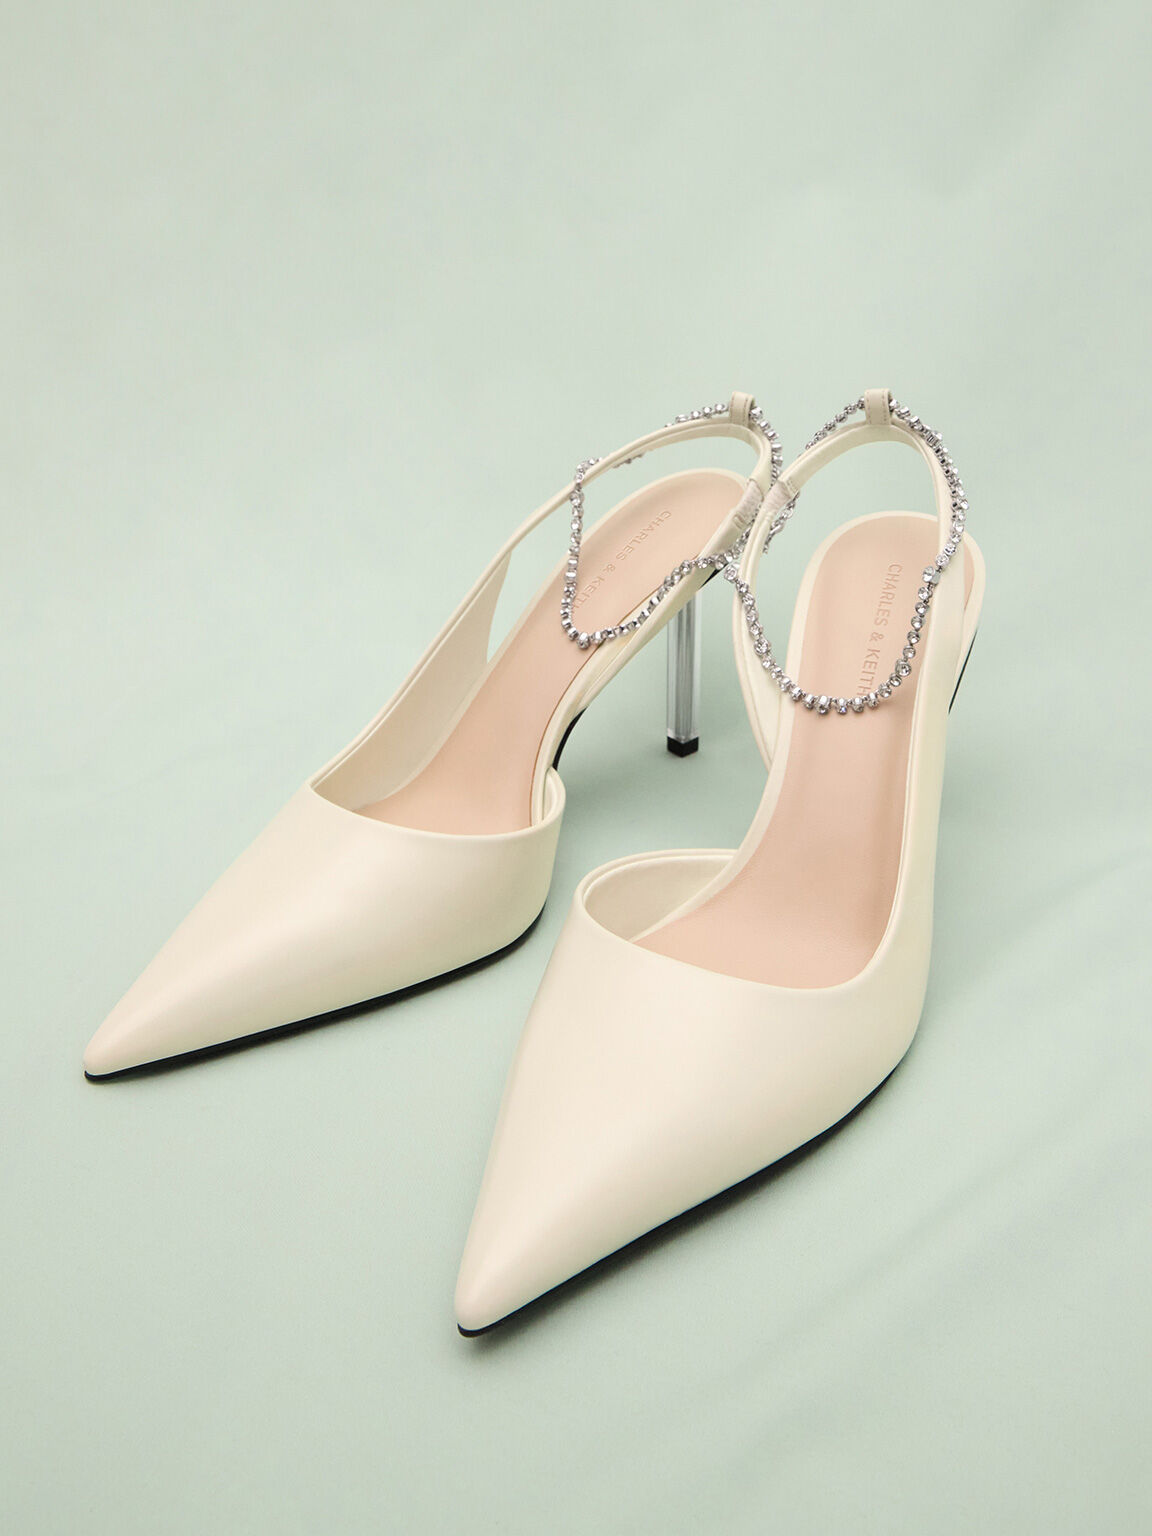 Crystal-Chain Ankle-Strap D'Orsay Pumps, Cream, hi-res